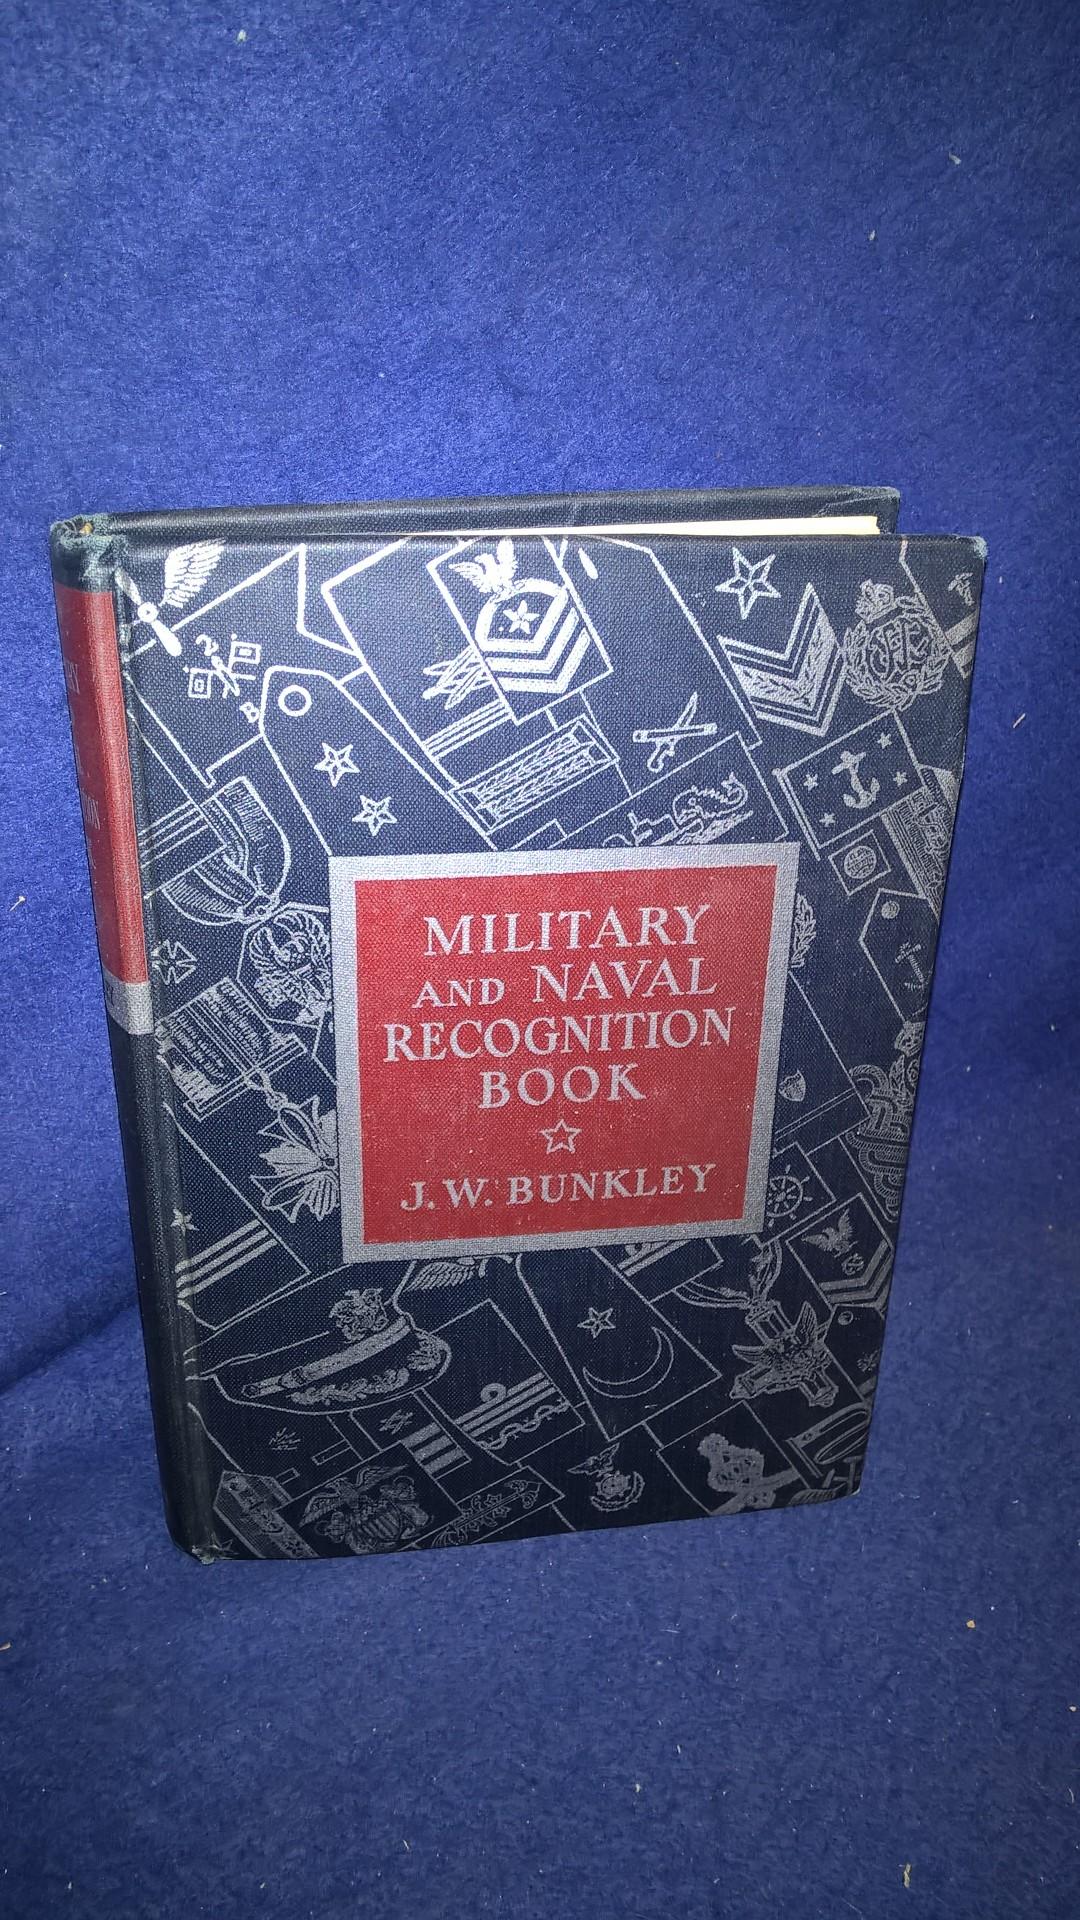 Military and Naval Recognition Book. A Handbook on the Organization, Insignia of Rank of the World's Armed Forces.Etiquette and Customs of the American Services.